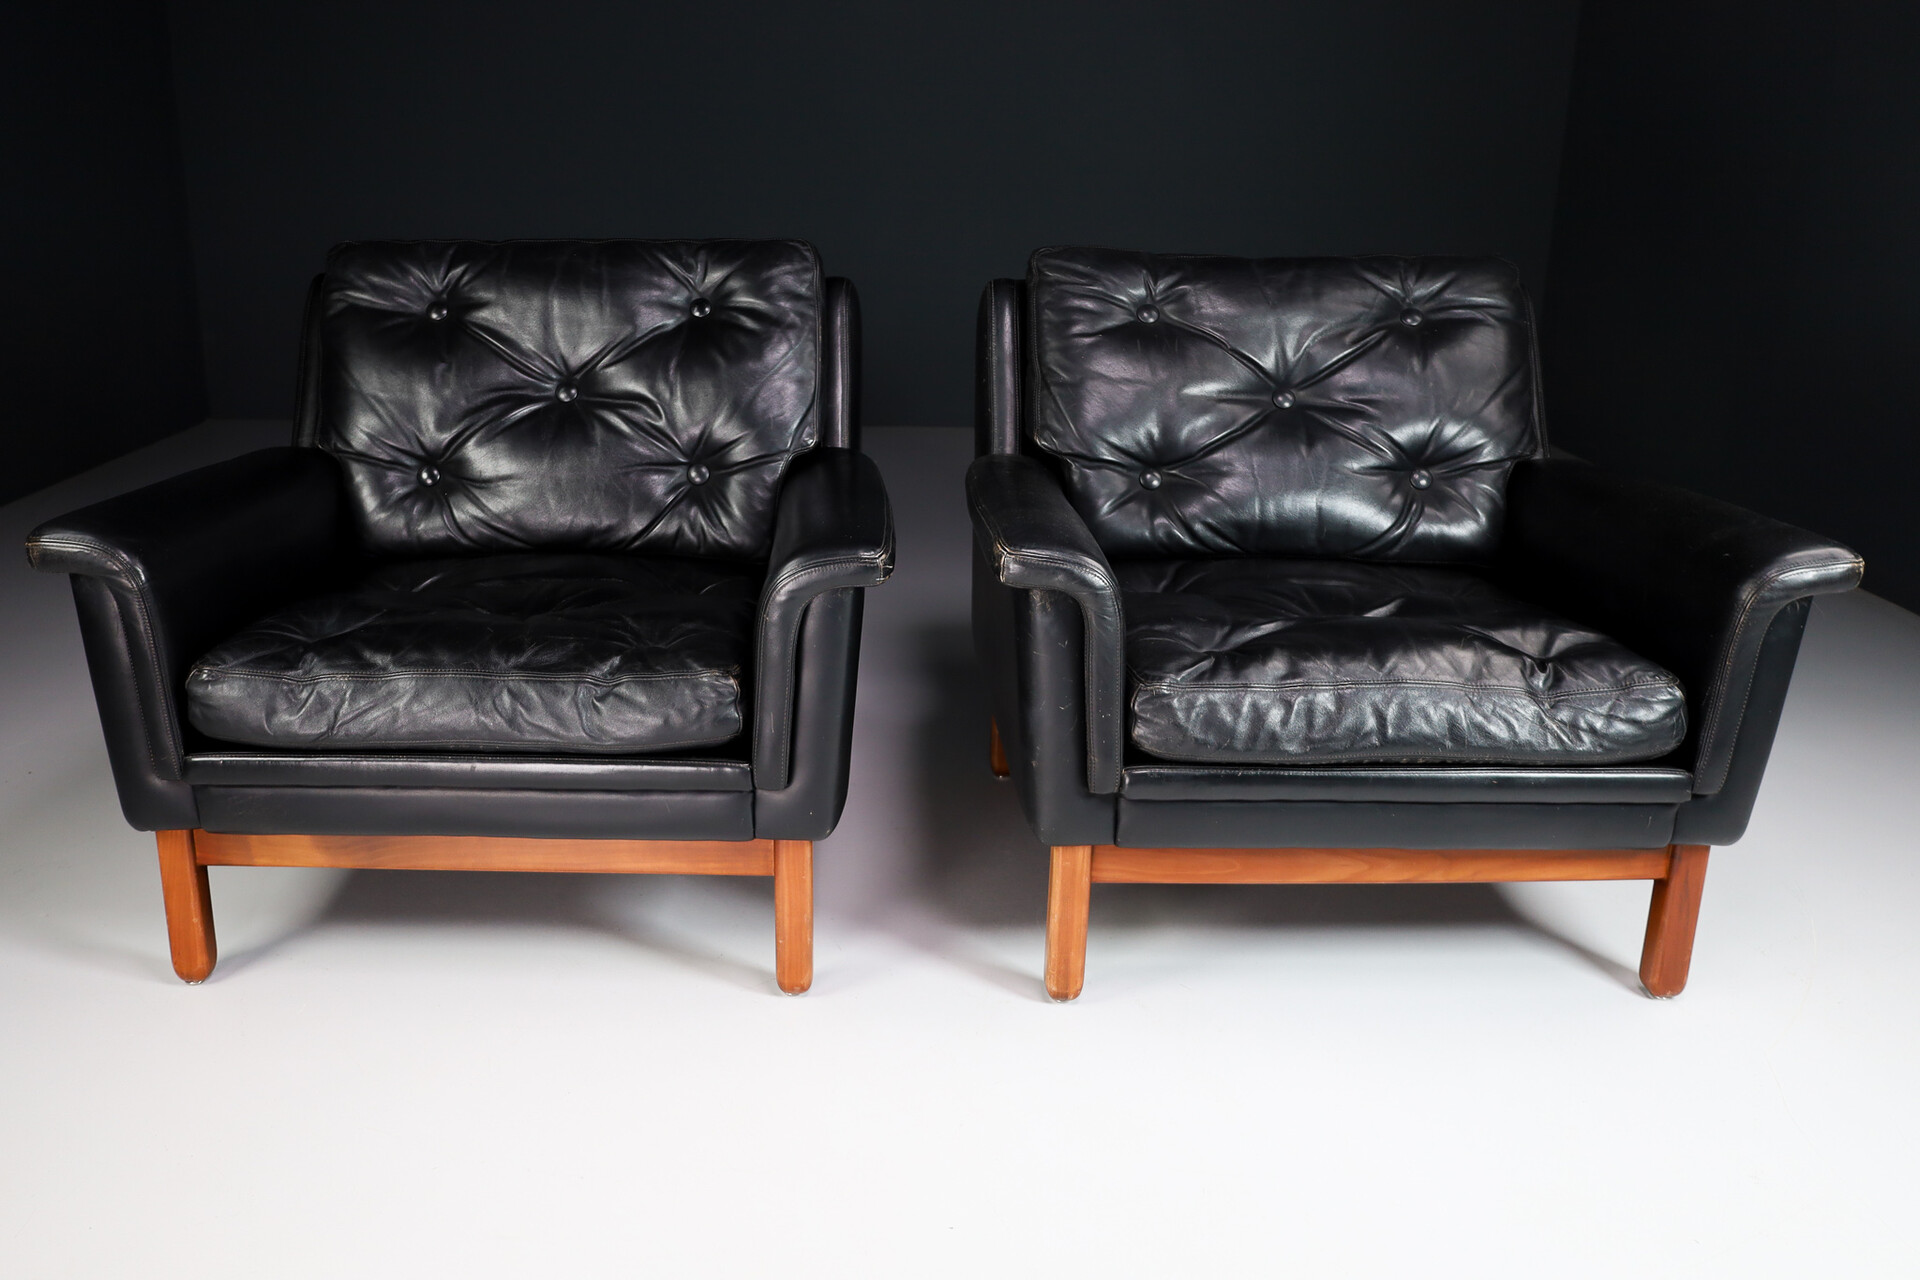 Mid century modern Armchairs / lounge chairs in Leather, Germany 1960s Mid-20th century